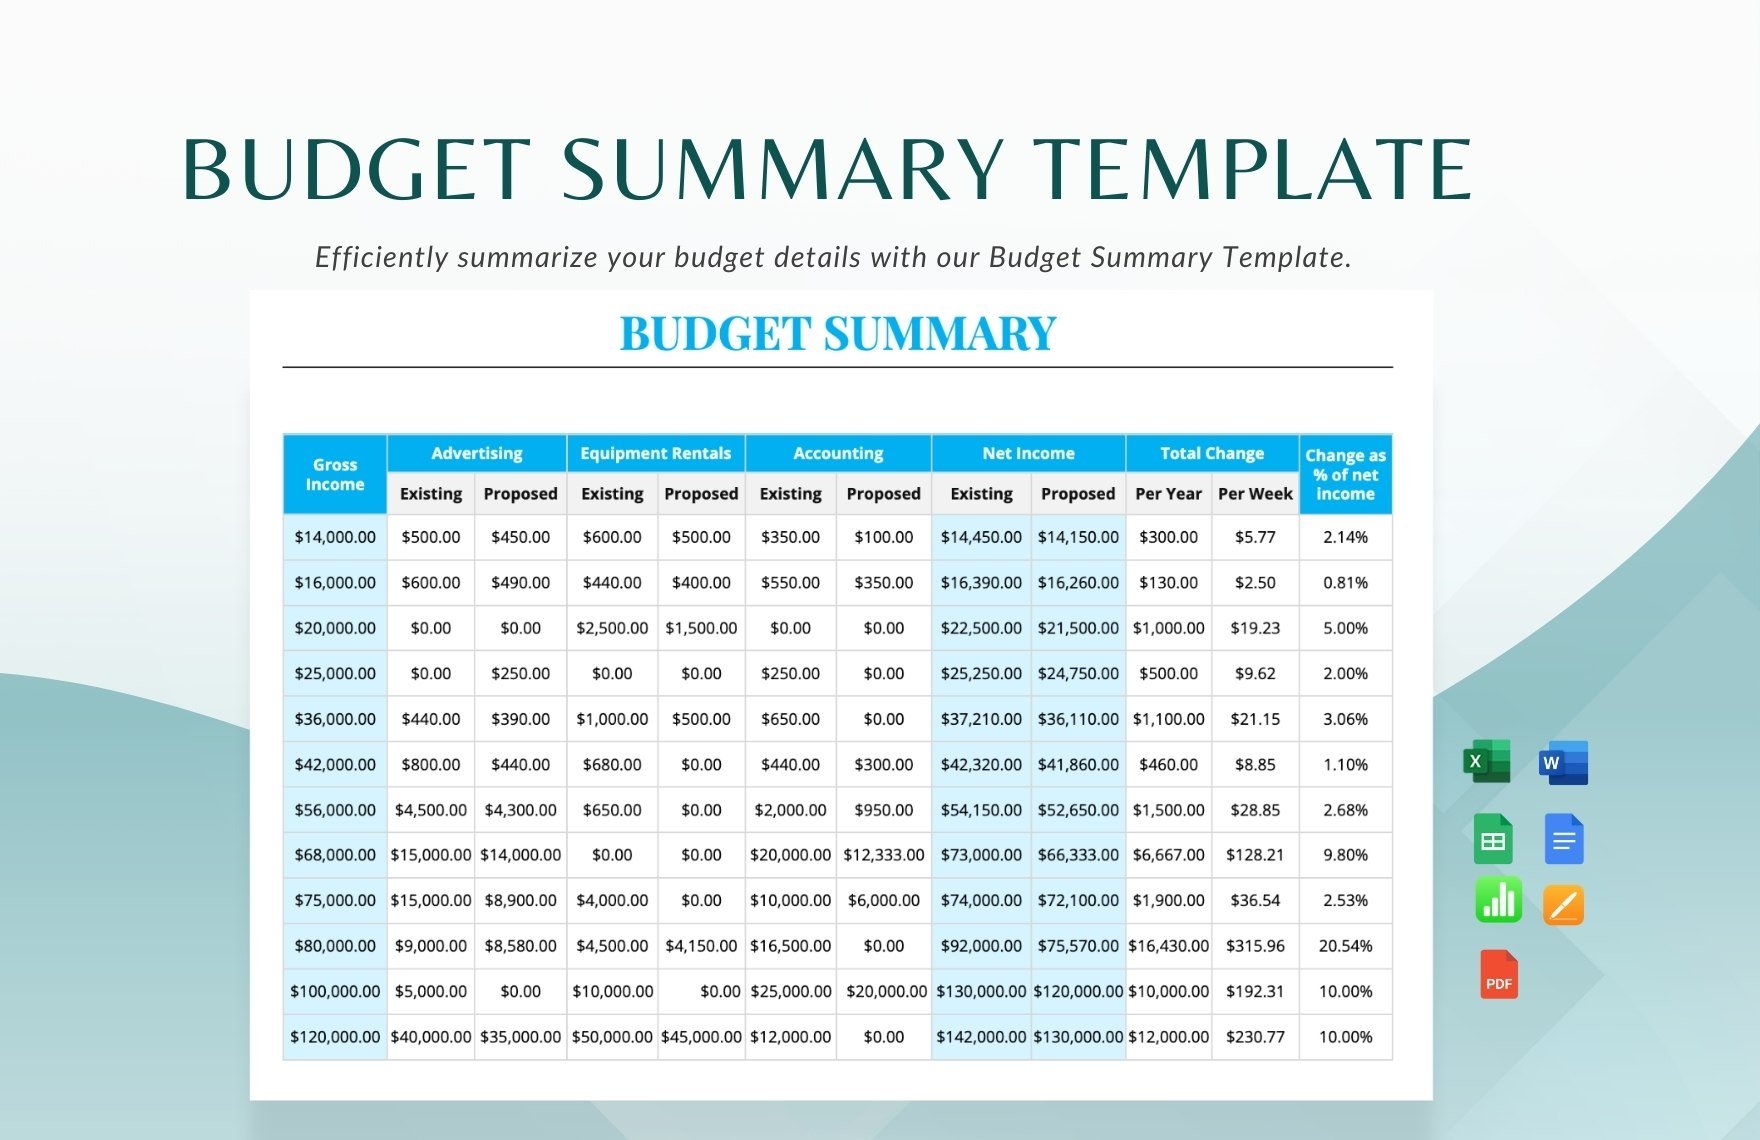 Free Budget Summary Template in Word, Google Docs, Excel, PDF, Google Sheets, Apple Pages, Apple Numbers